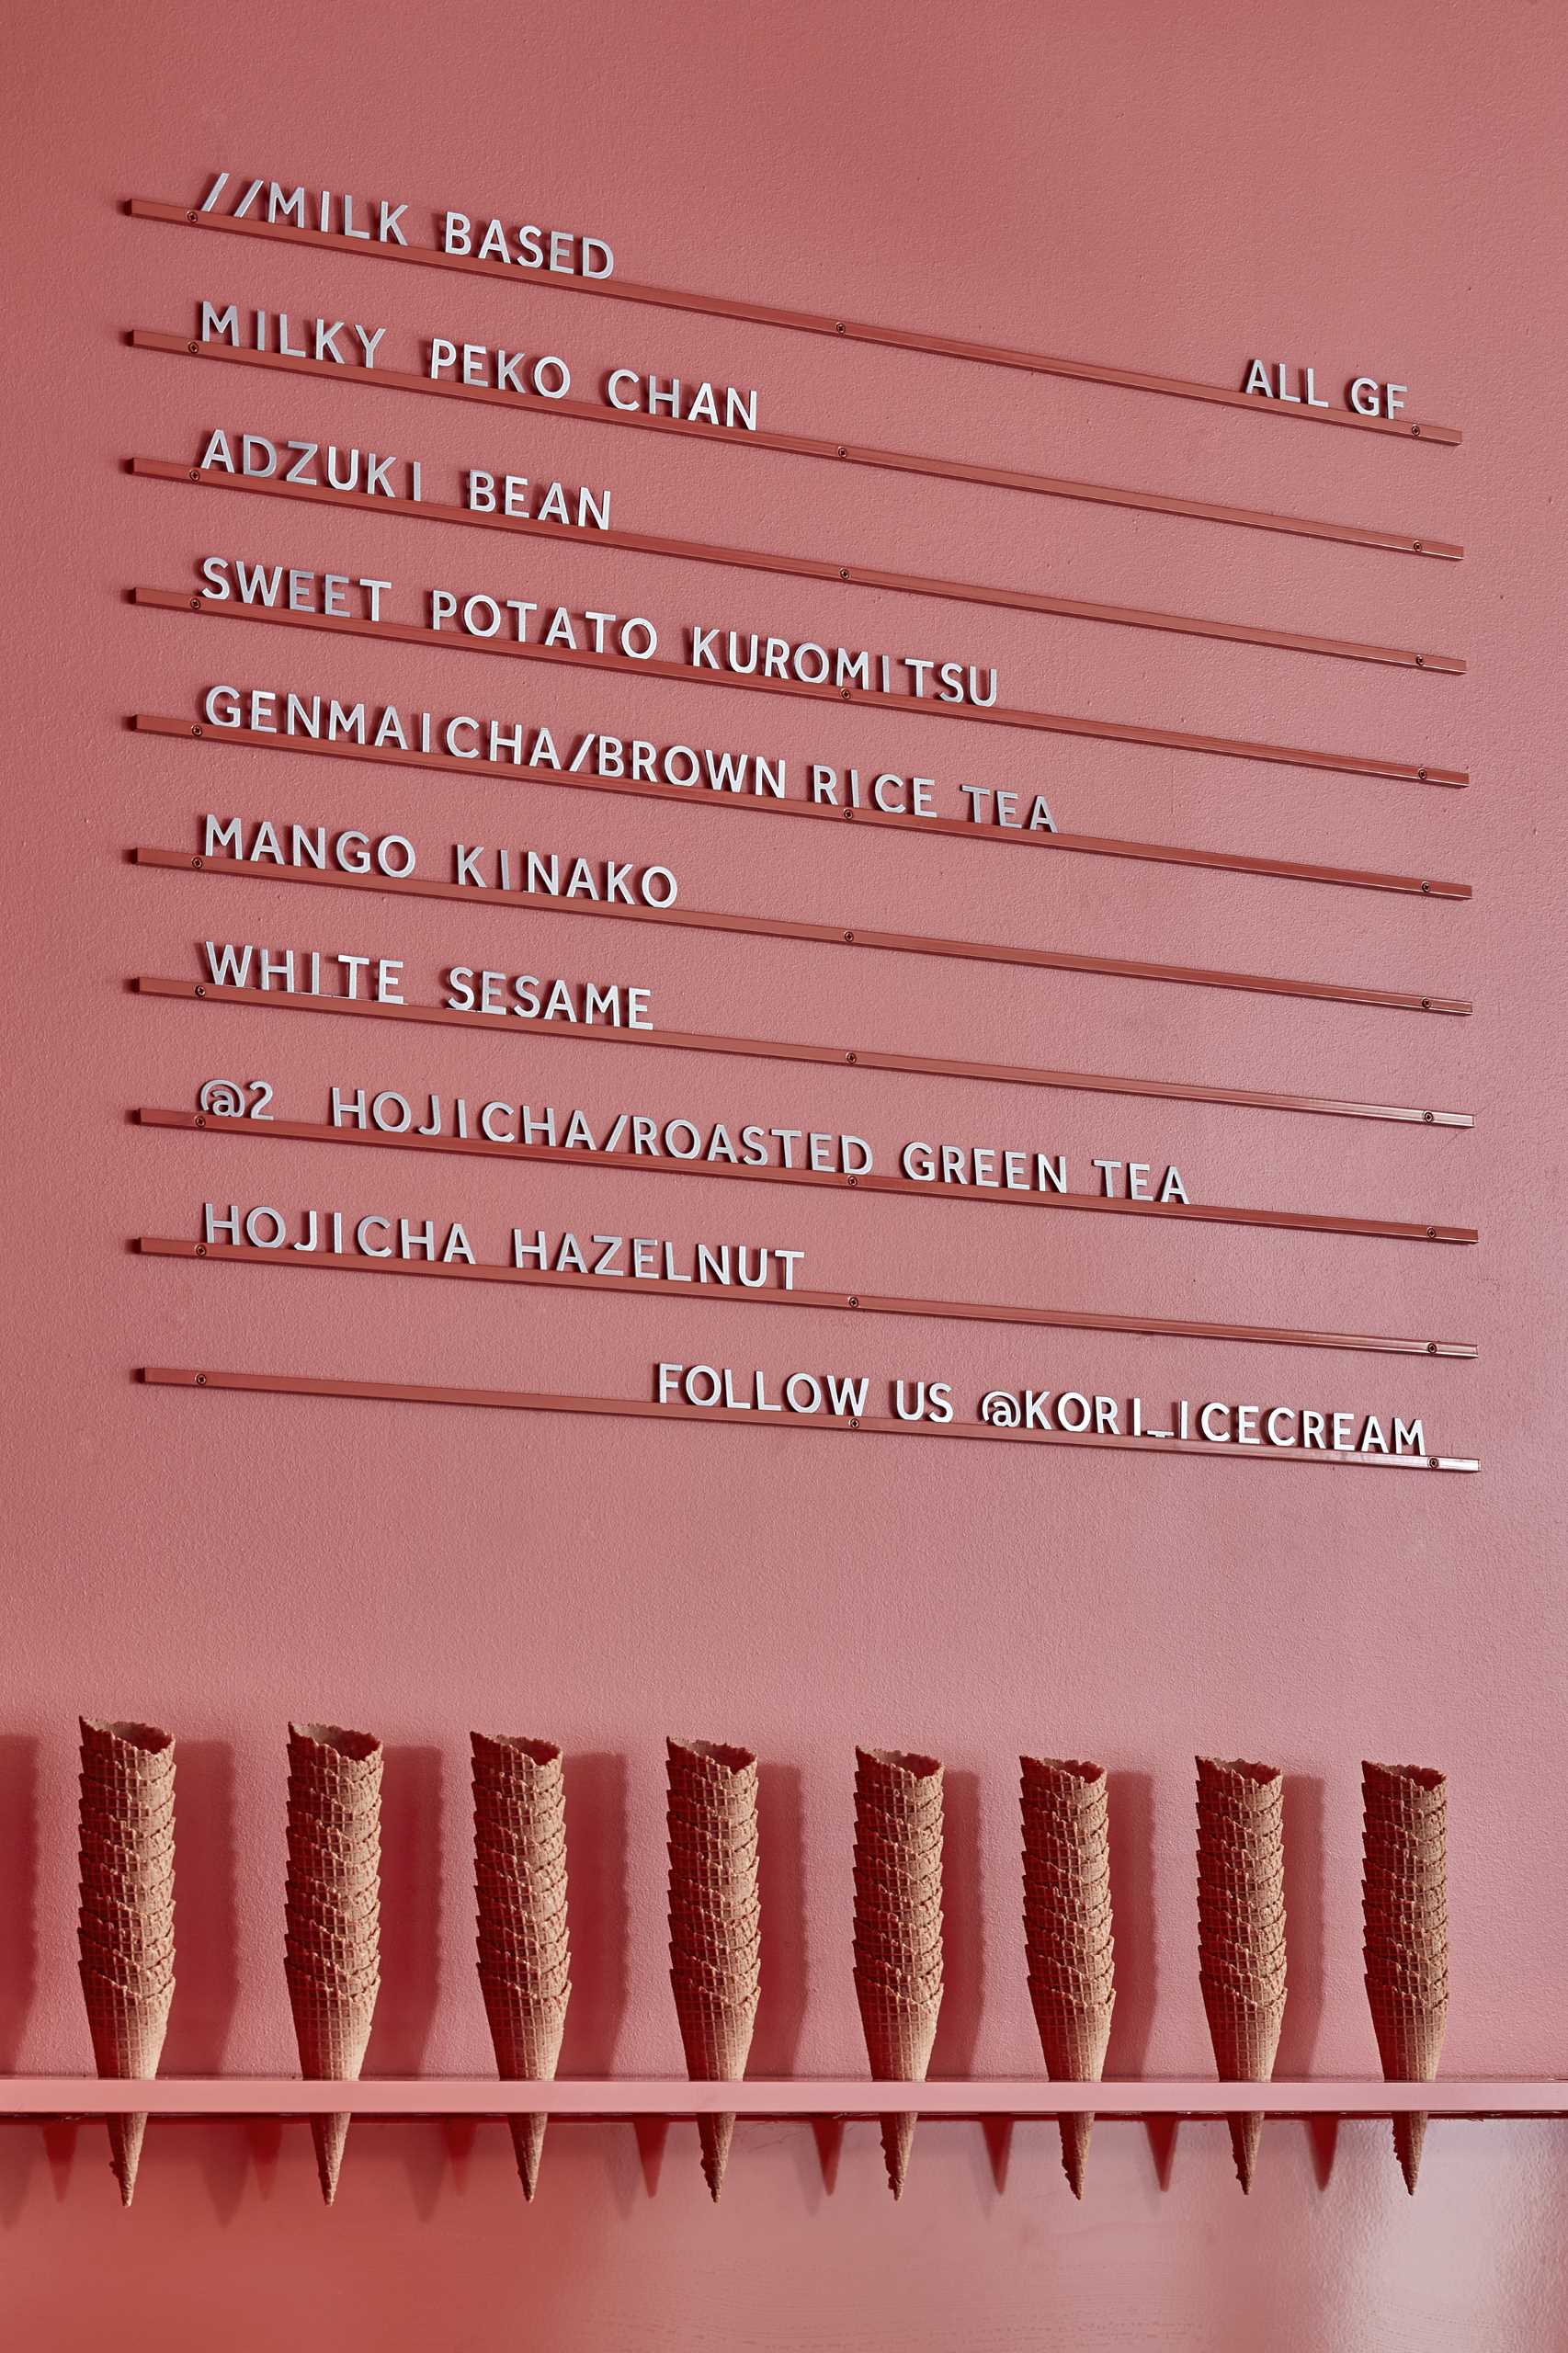 A modern ice cream shop with a matte pink wall that includes a minimalist menu.